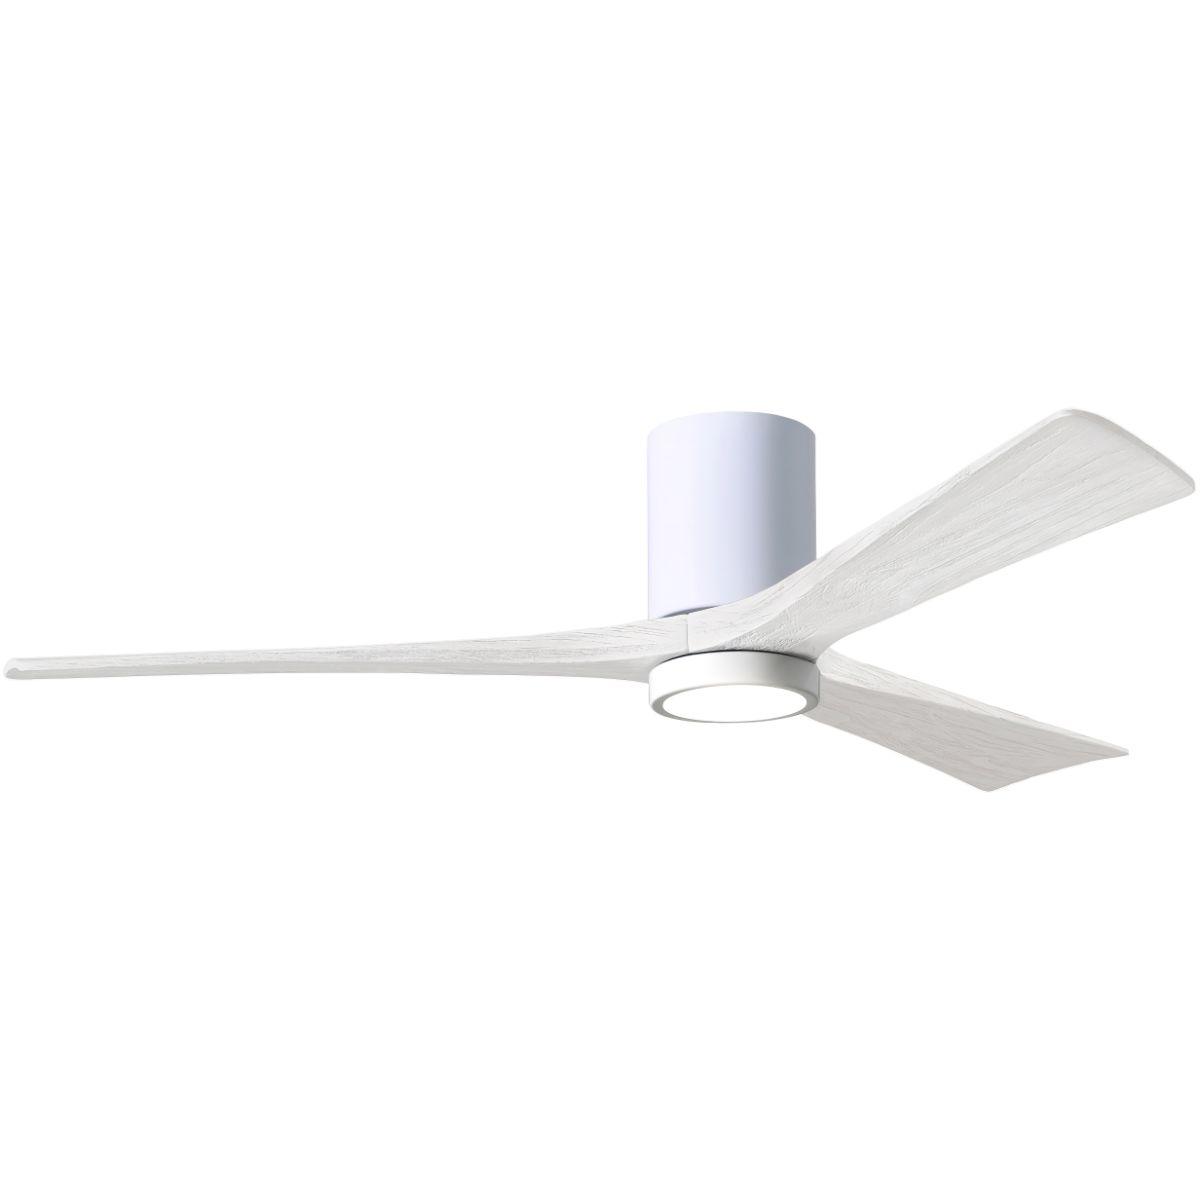 Irene 60 Inch Low Profile Outdoor Ceiling Fan With Light, Wall And Remote Control Included